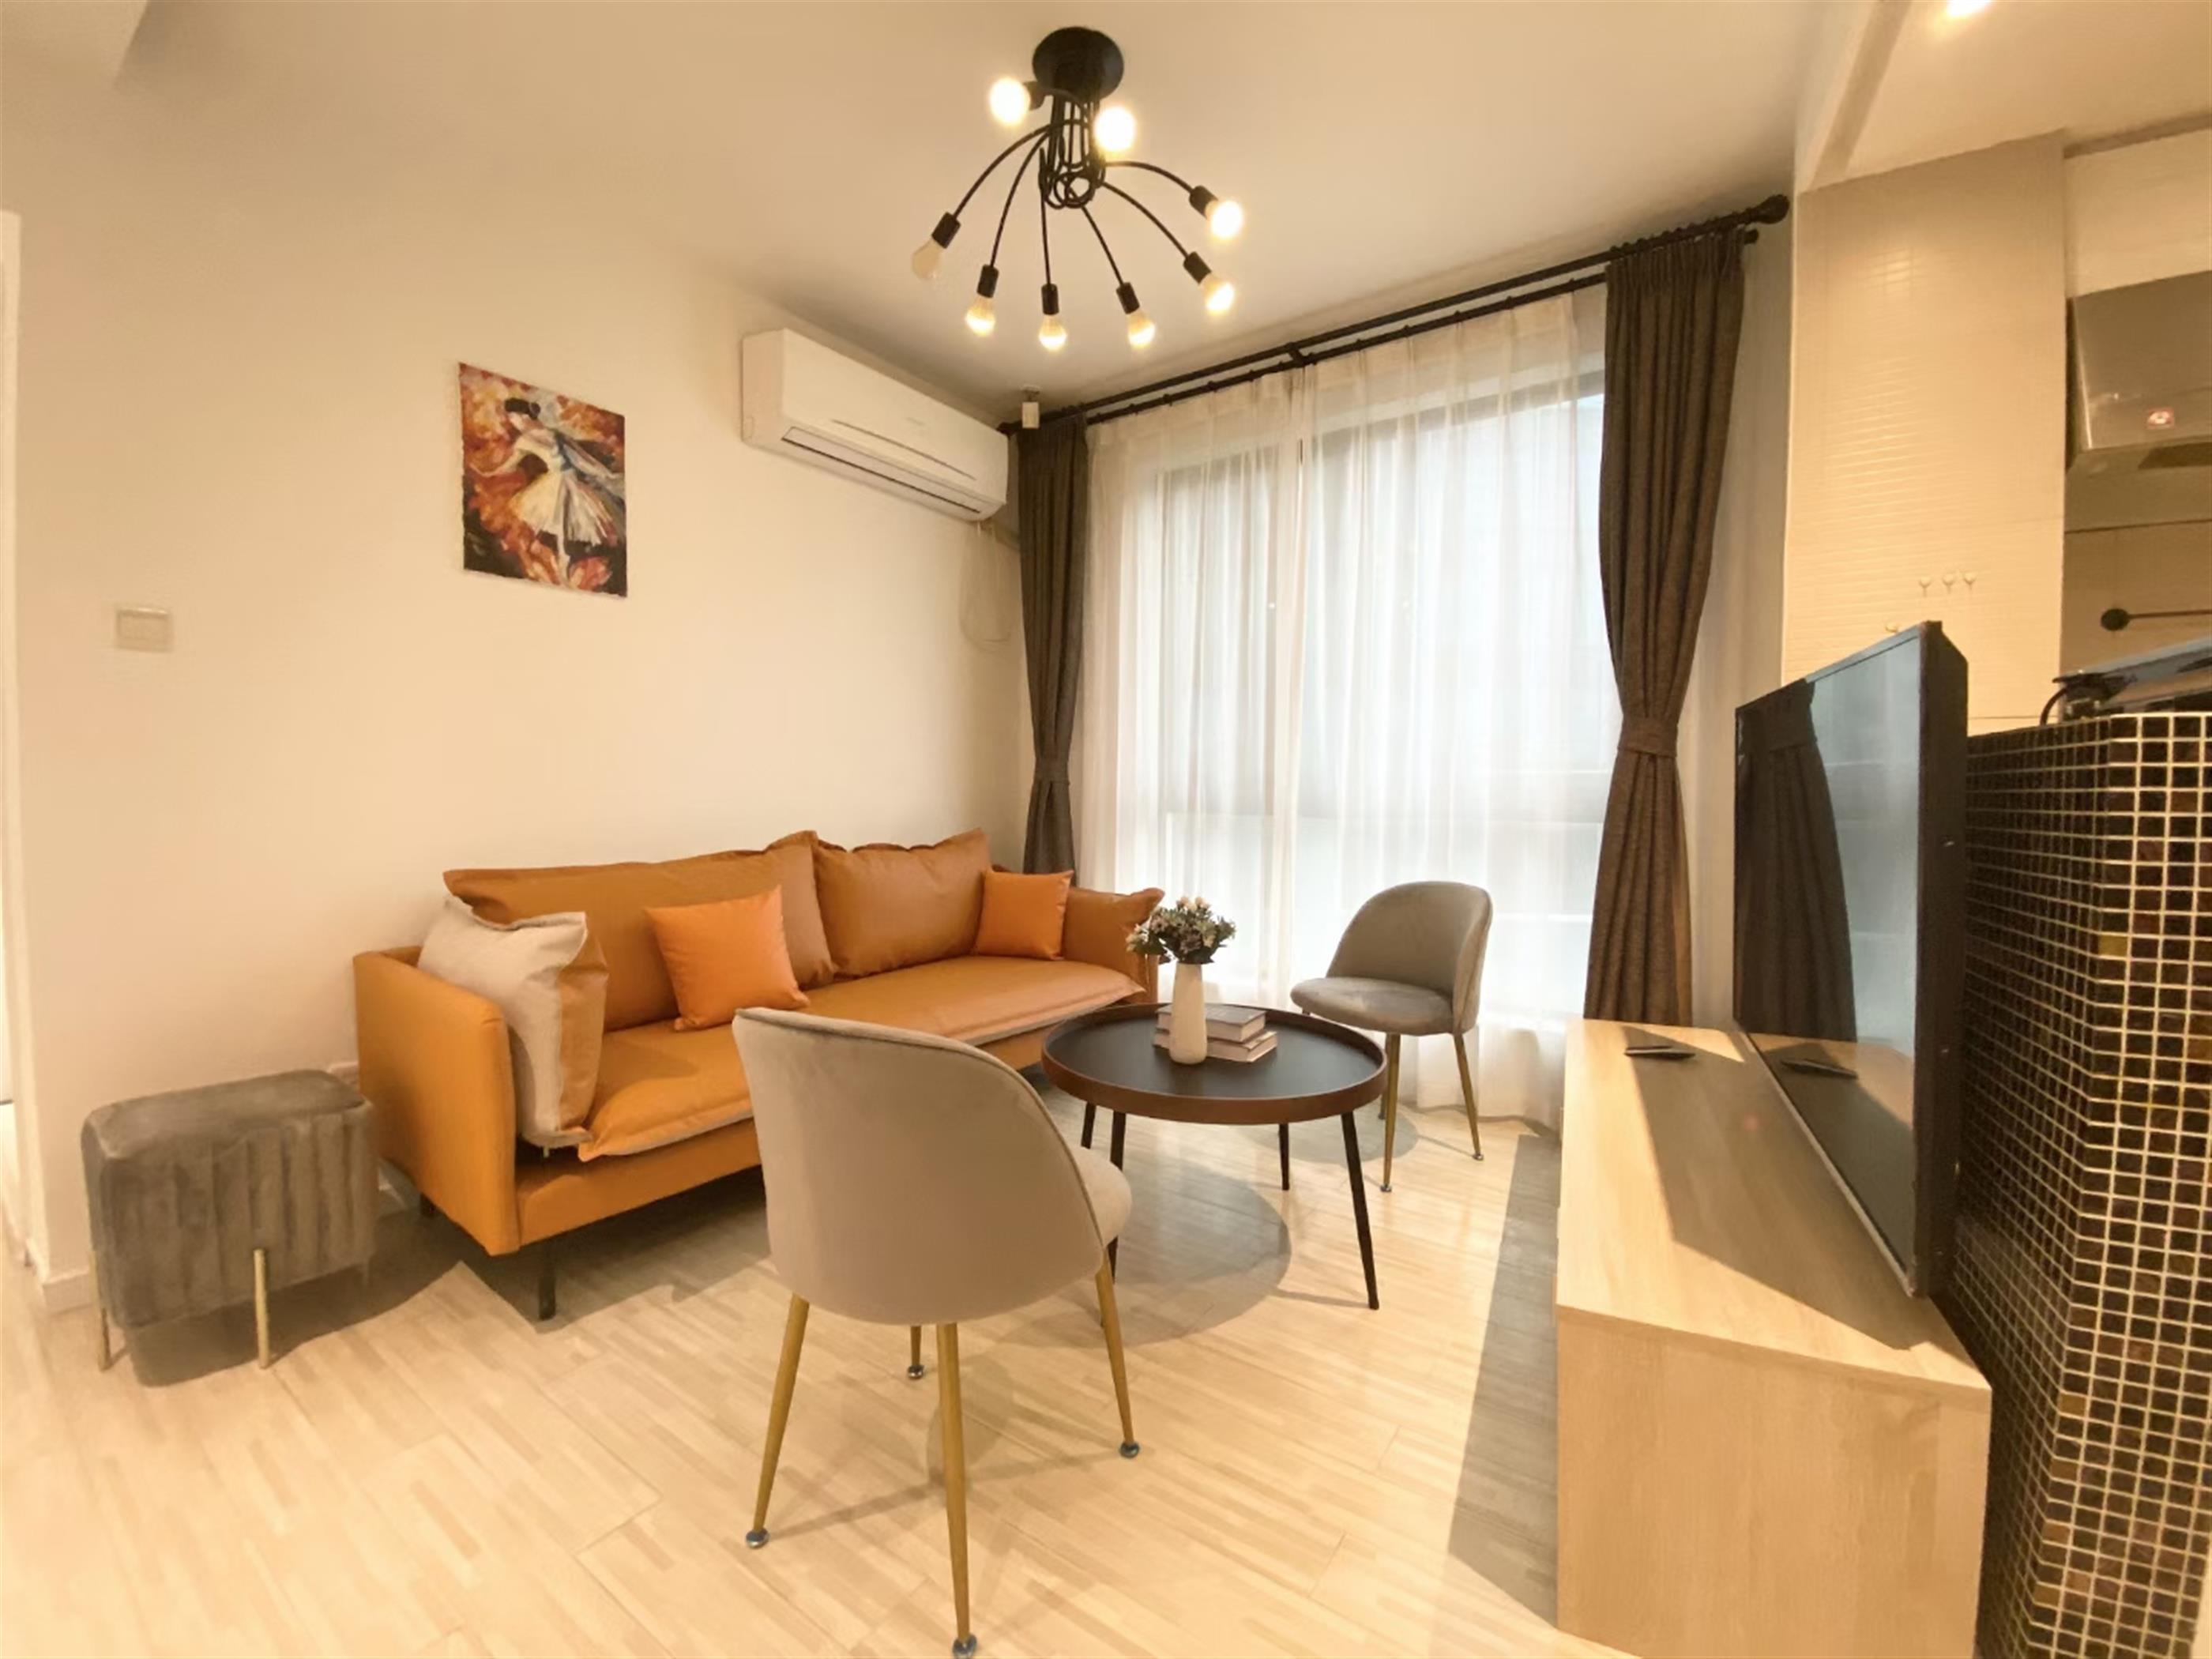 new furniture Spacious Newly Renovated 2BR Top of City Apt Nr Ln 2/12/13 for Rent in Shanghai